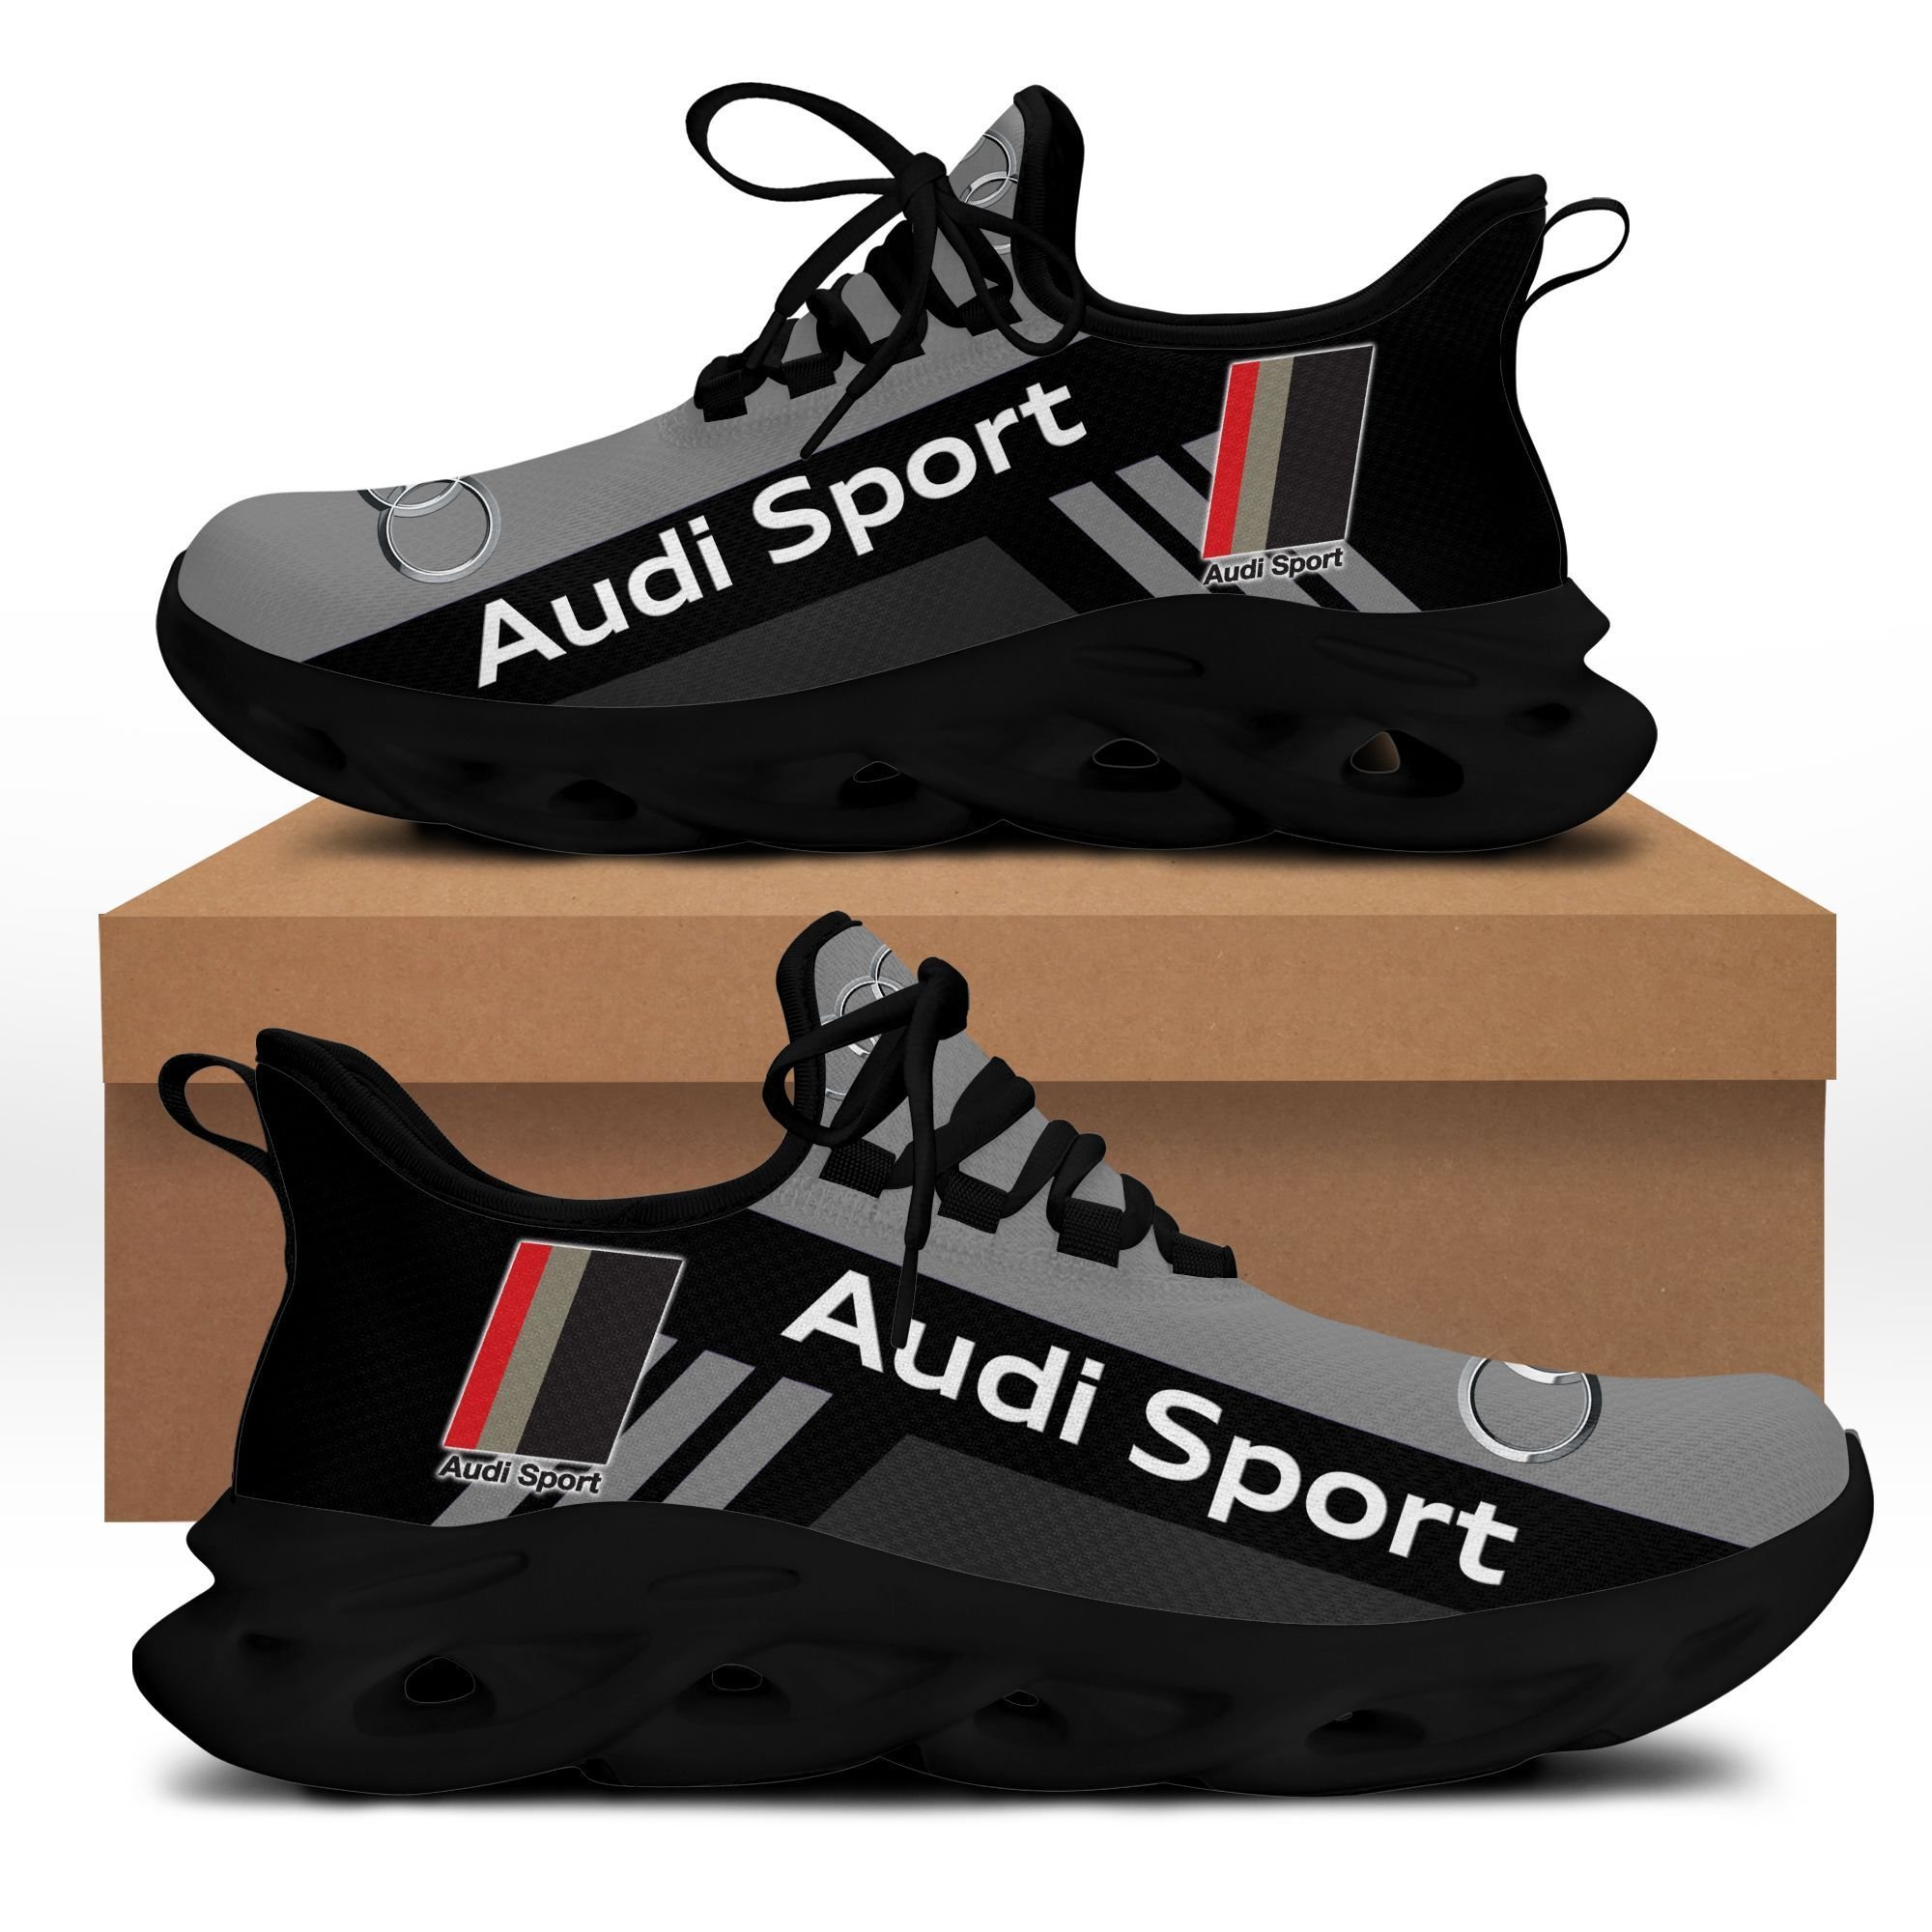 Audi Sport clunky max soul shoes